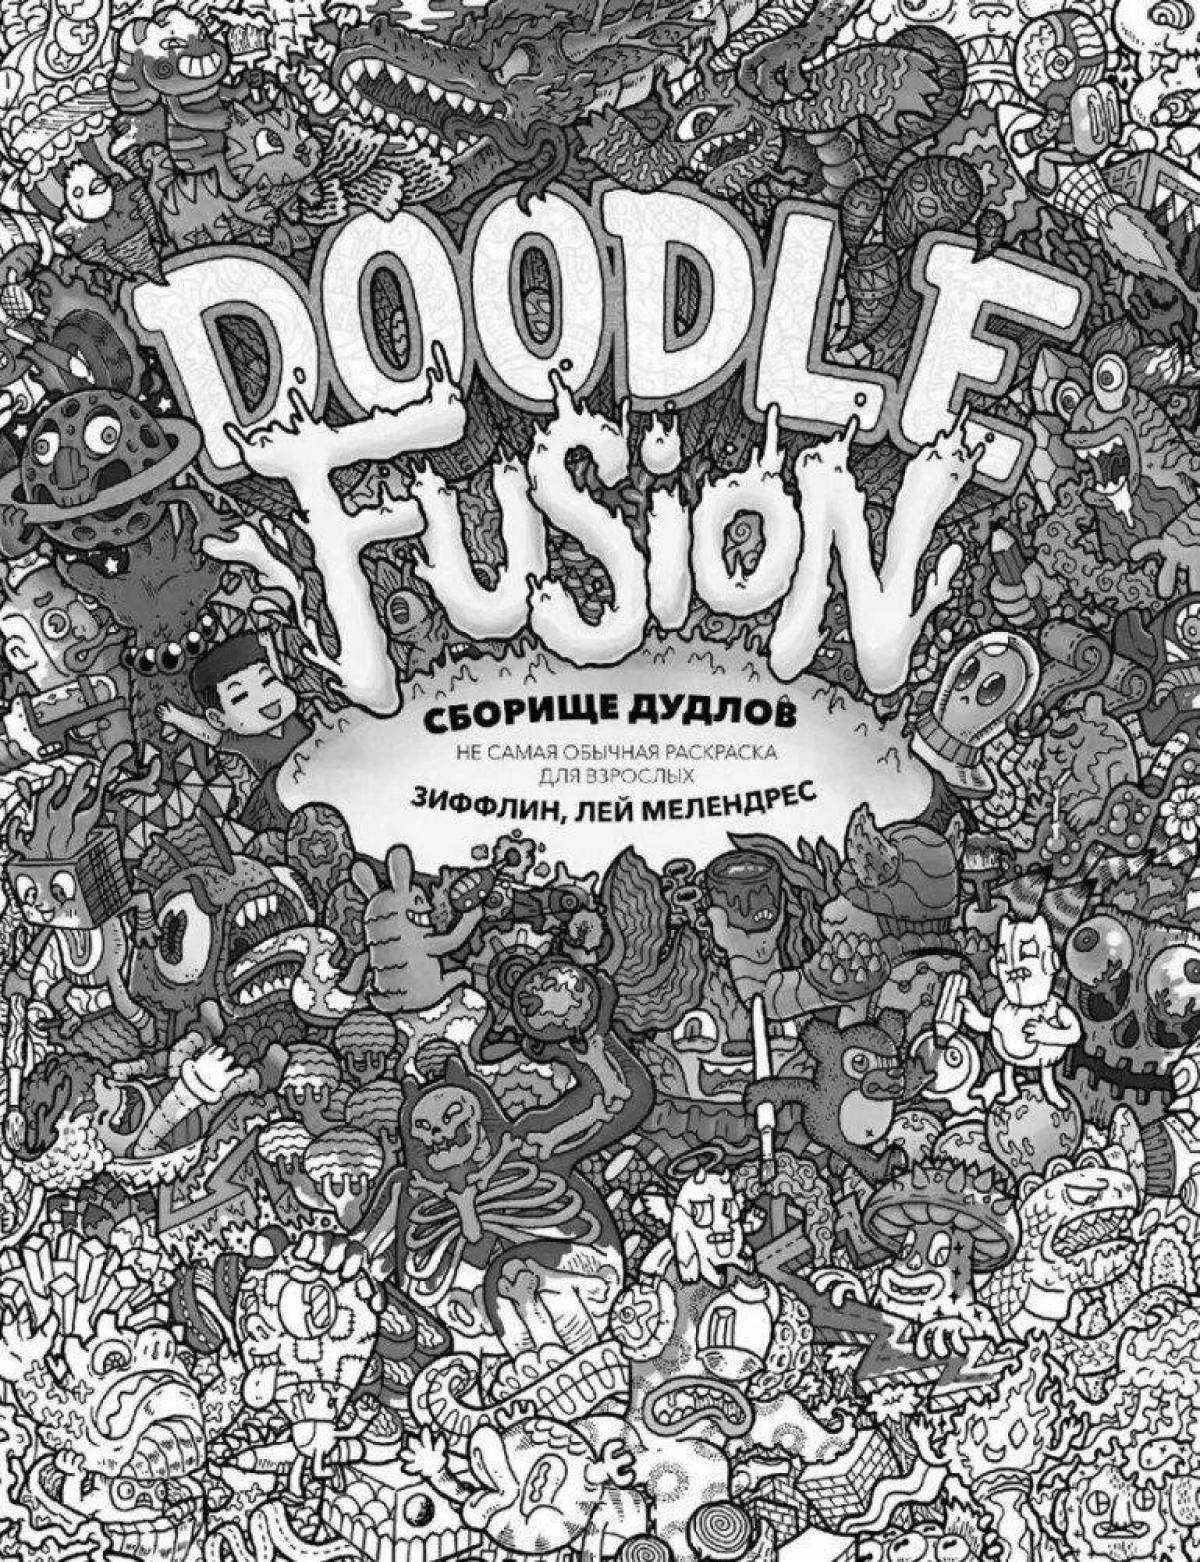 Color-frenzy coloring page doodle commotion